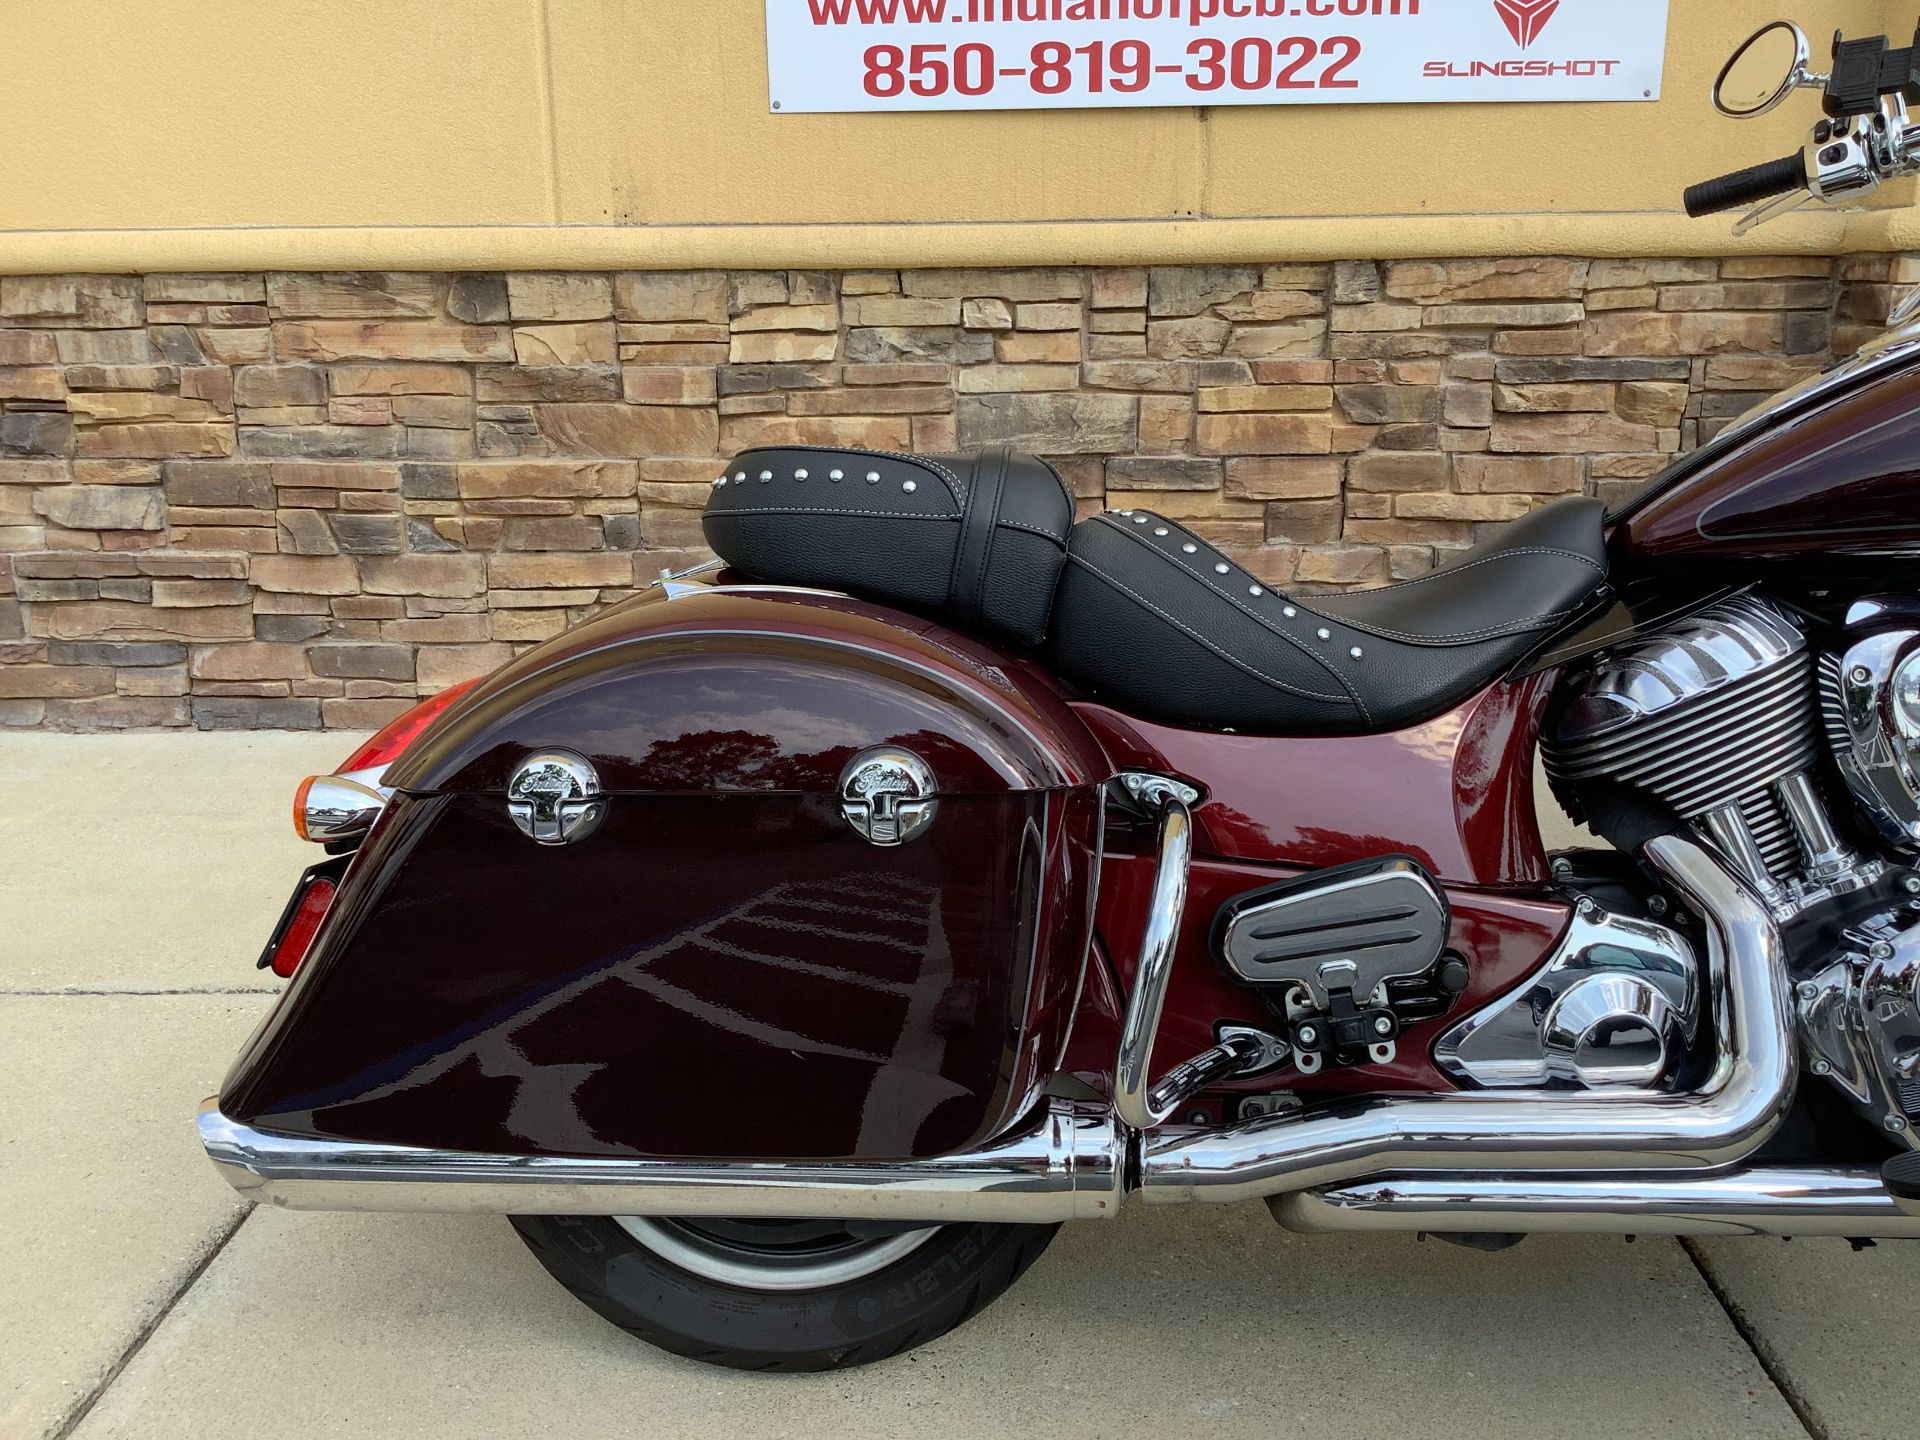 2021 Indian Motorcycle SPRINGFIELD TWO TONE in Panama City Beach, Florida - Photo 8